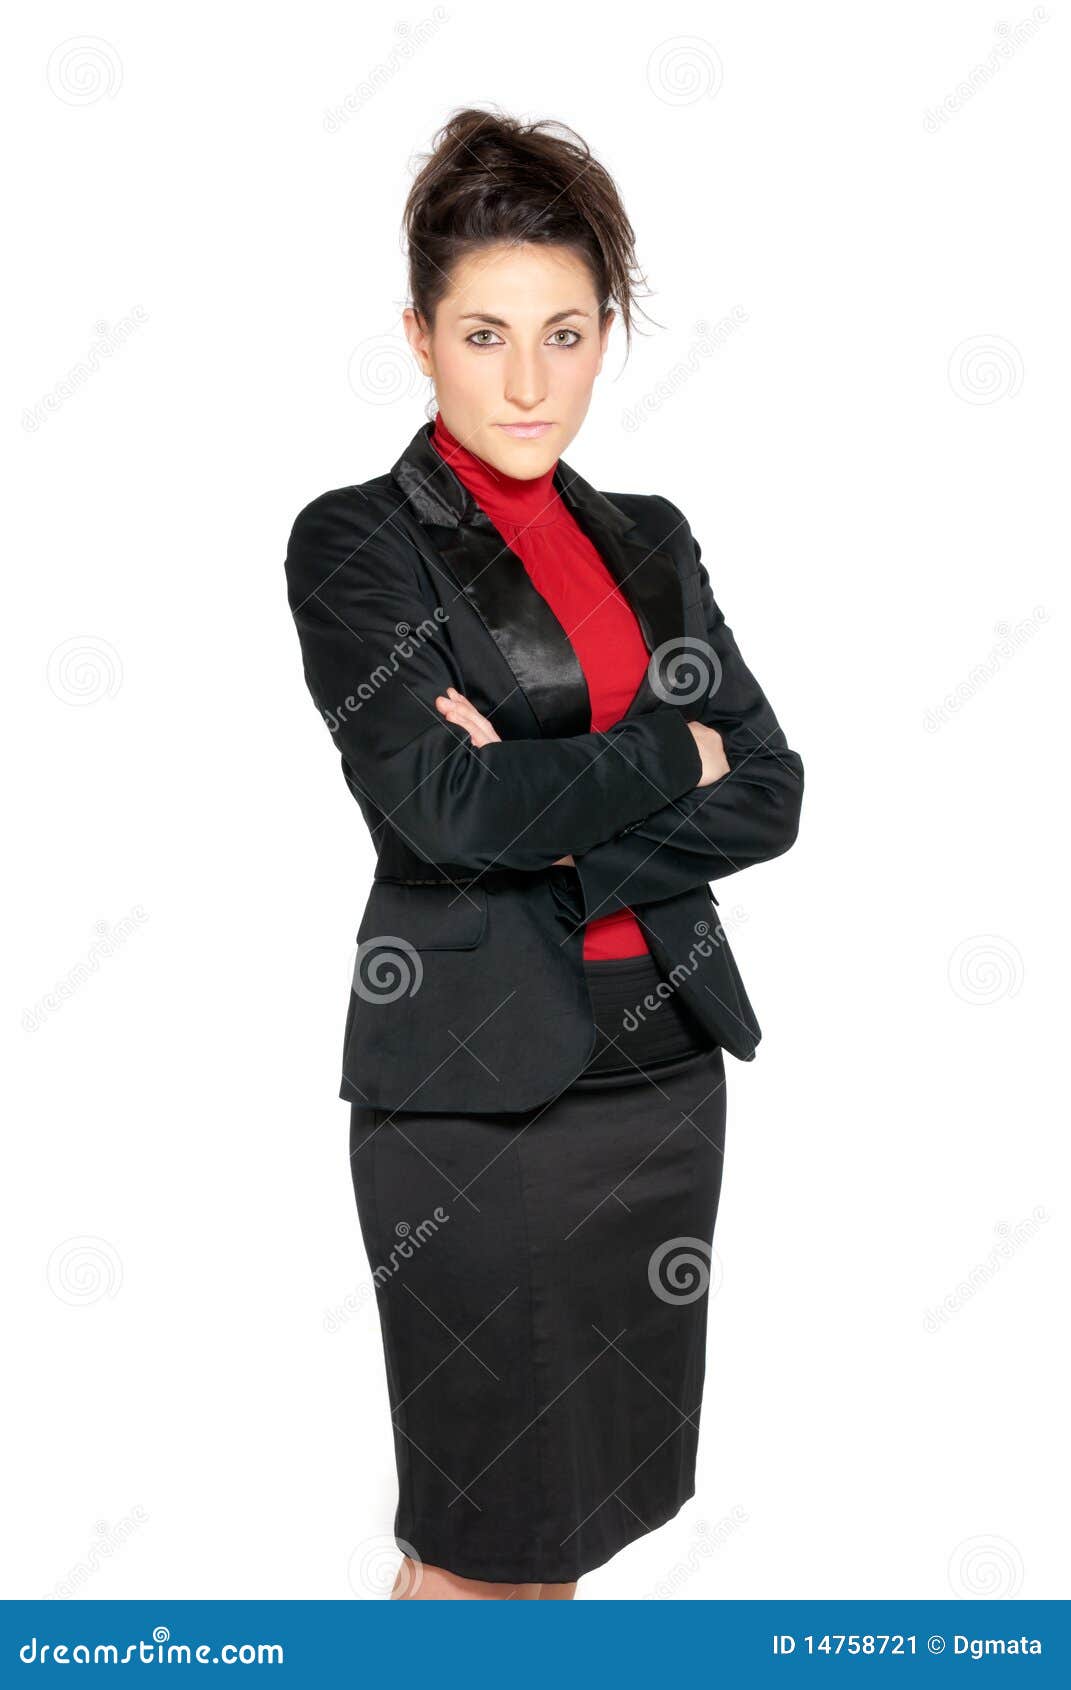 Businesswoman Looking Serious Isolated on White Stock Image - Image of ...